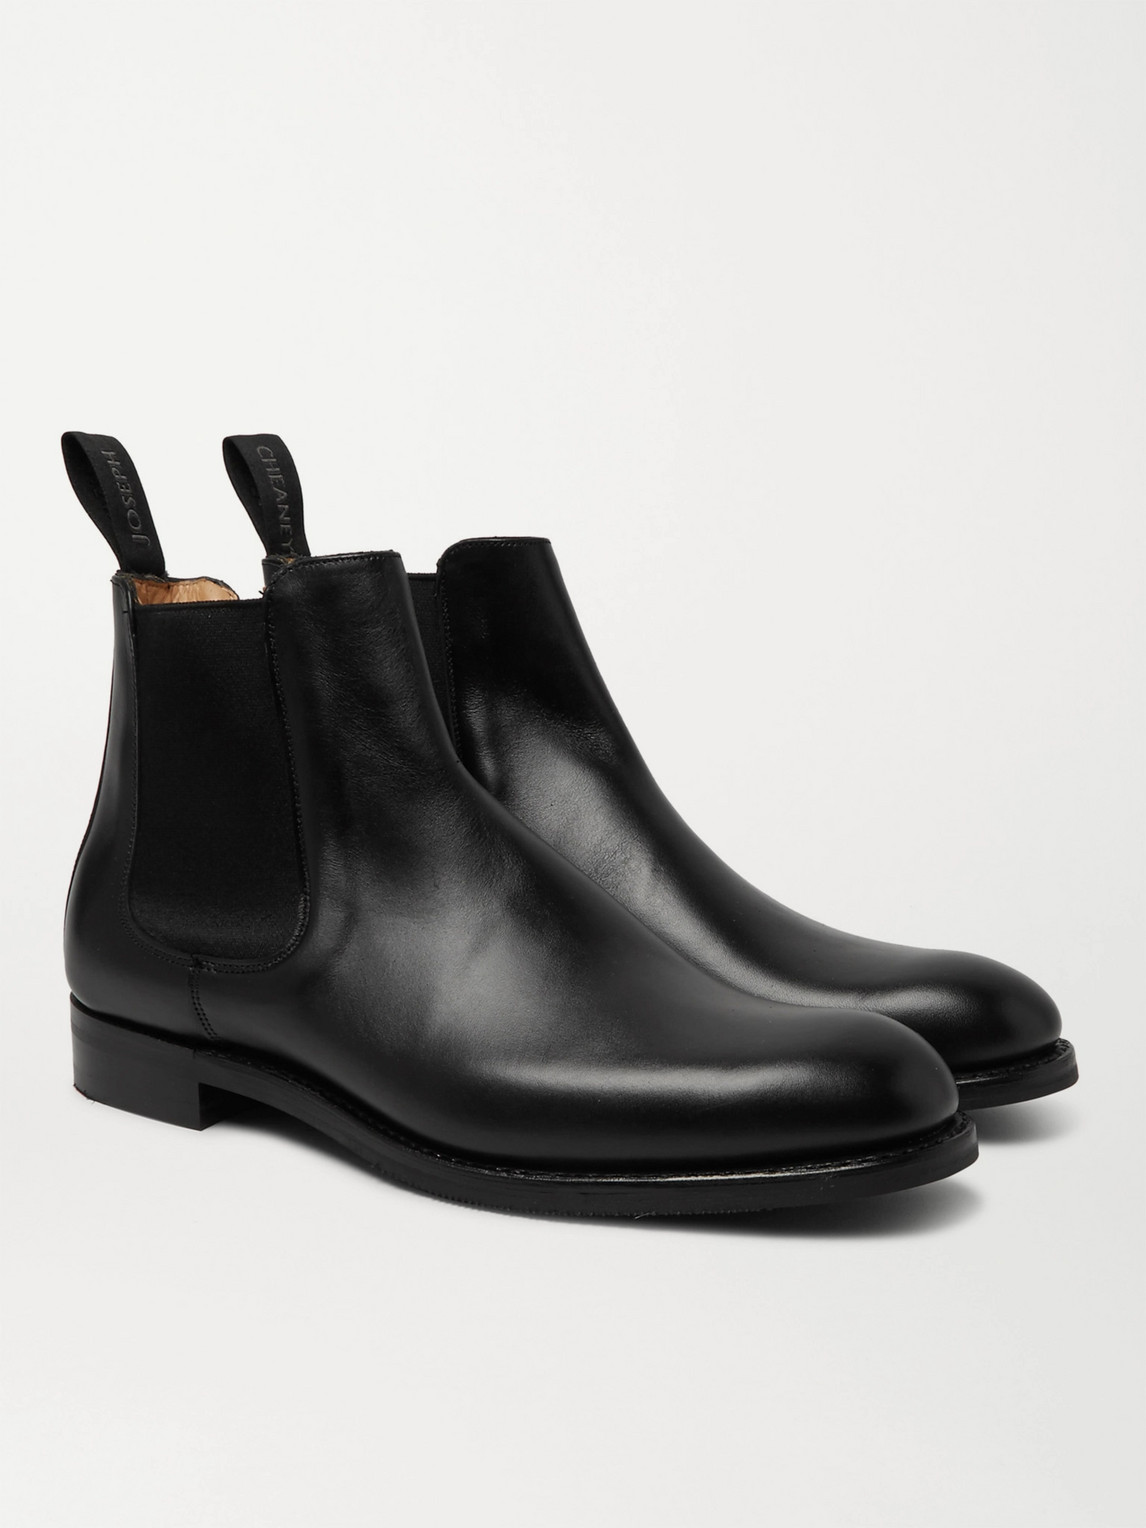 CHEANEY GODFREY LEATHER CHELSEA BOOTS